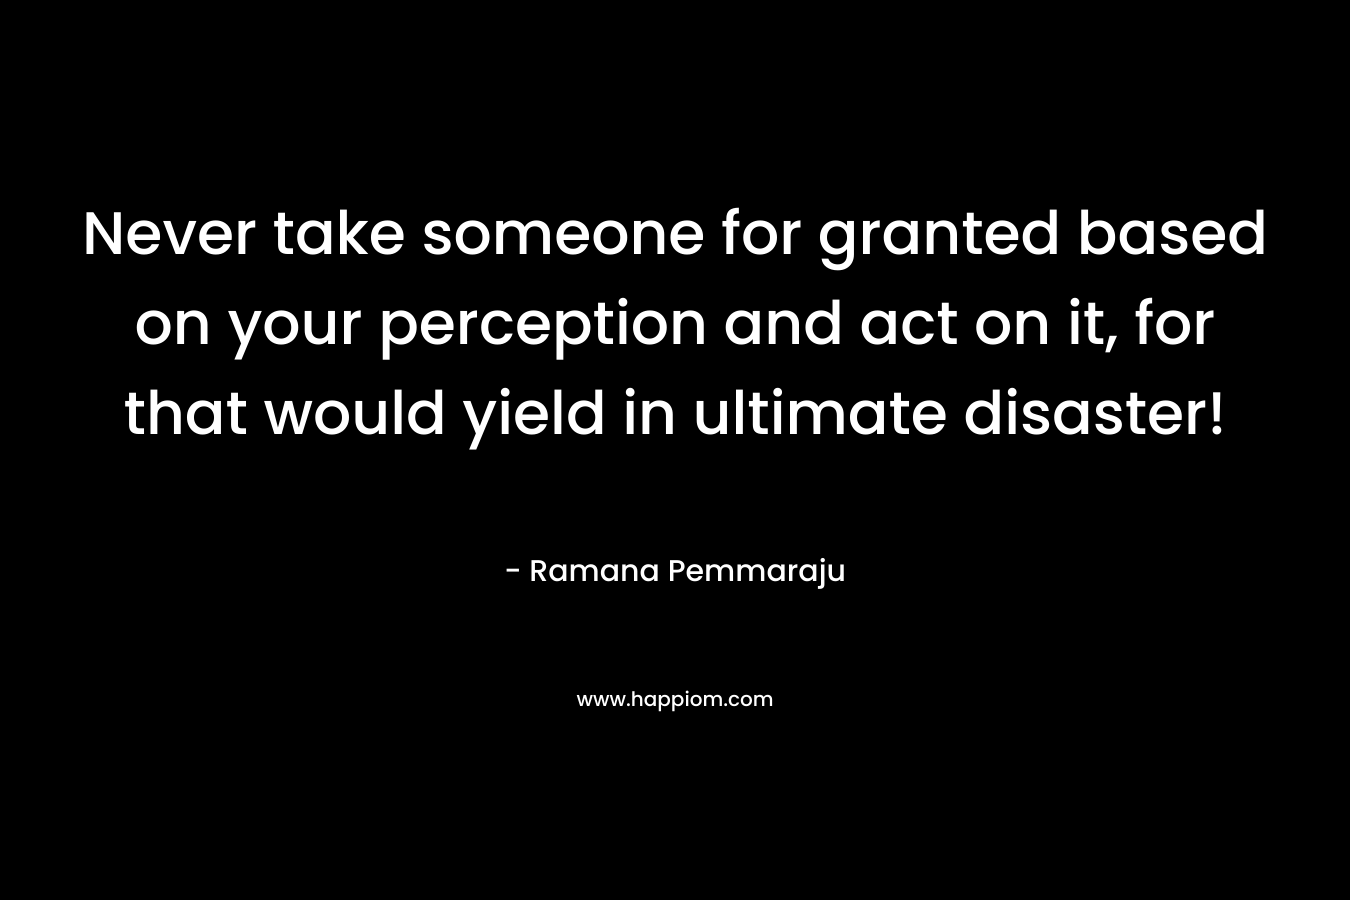 Never take someone for granted based on your perception and act on it, for that would yield in ultimate disaster!